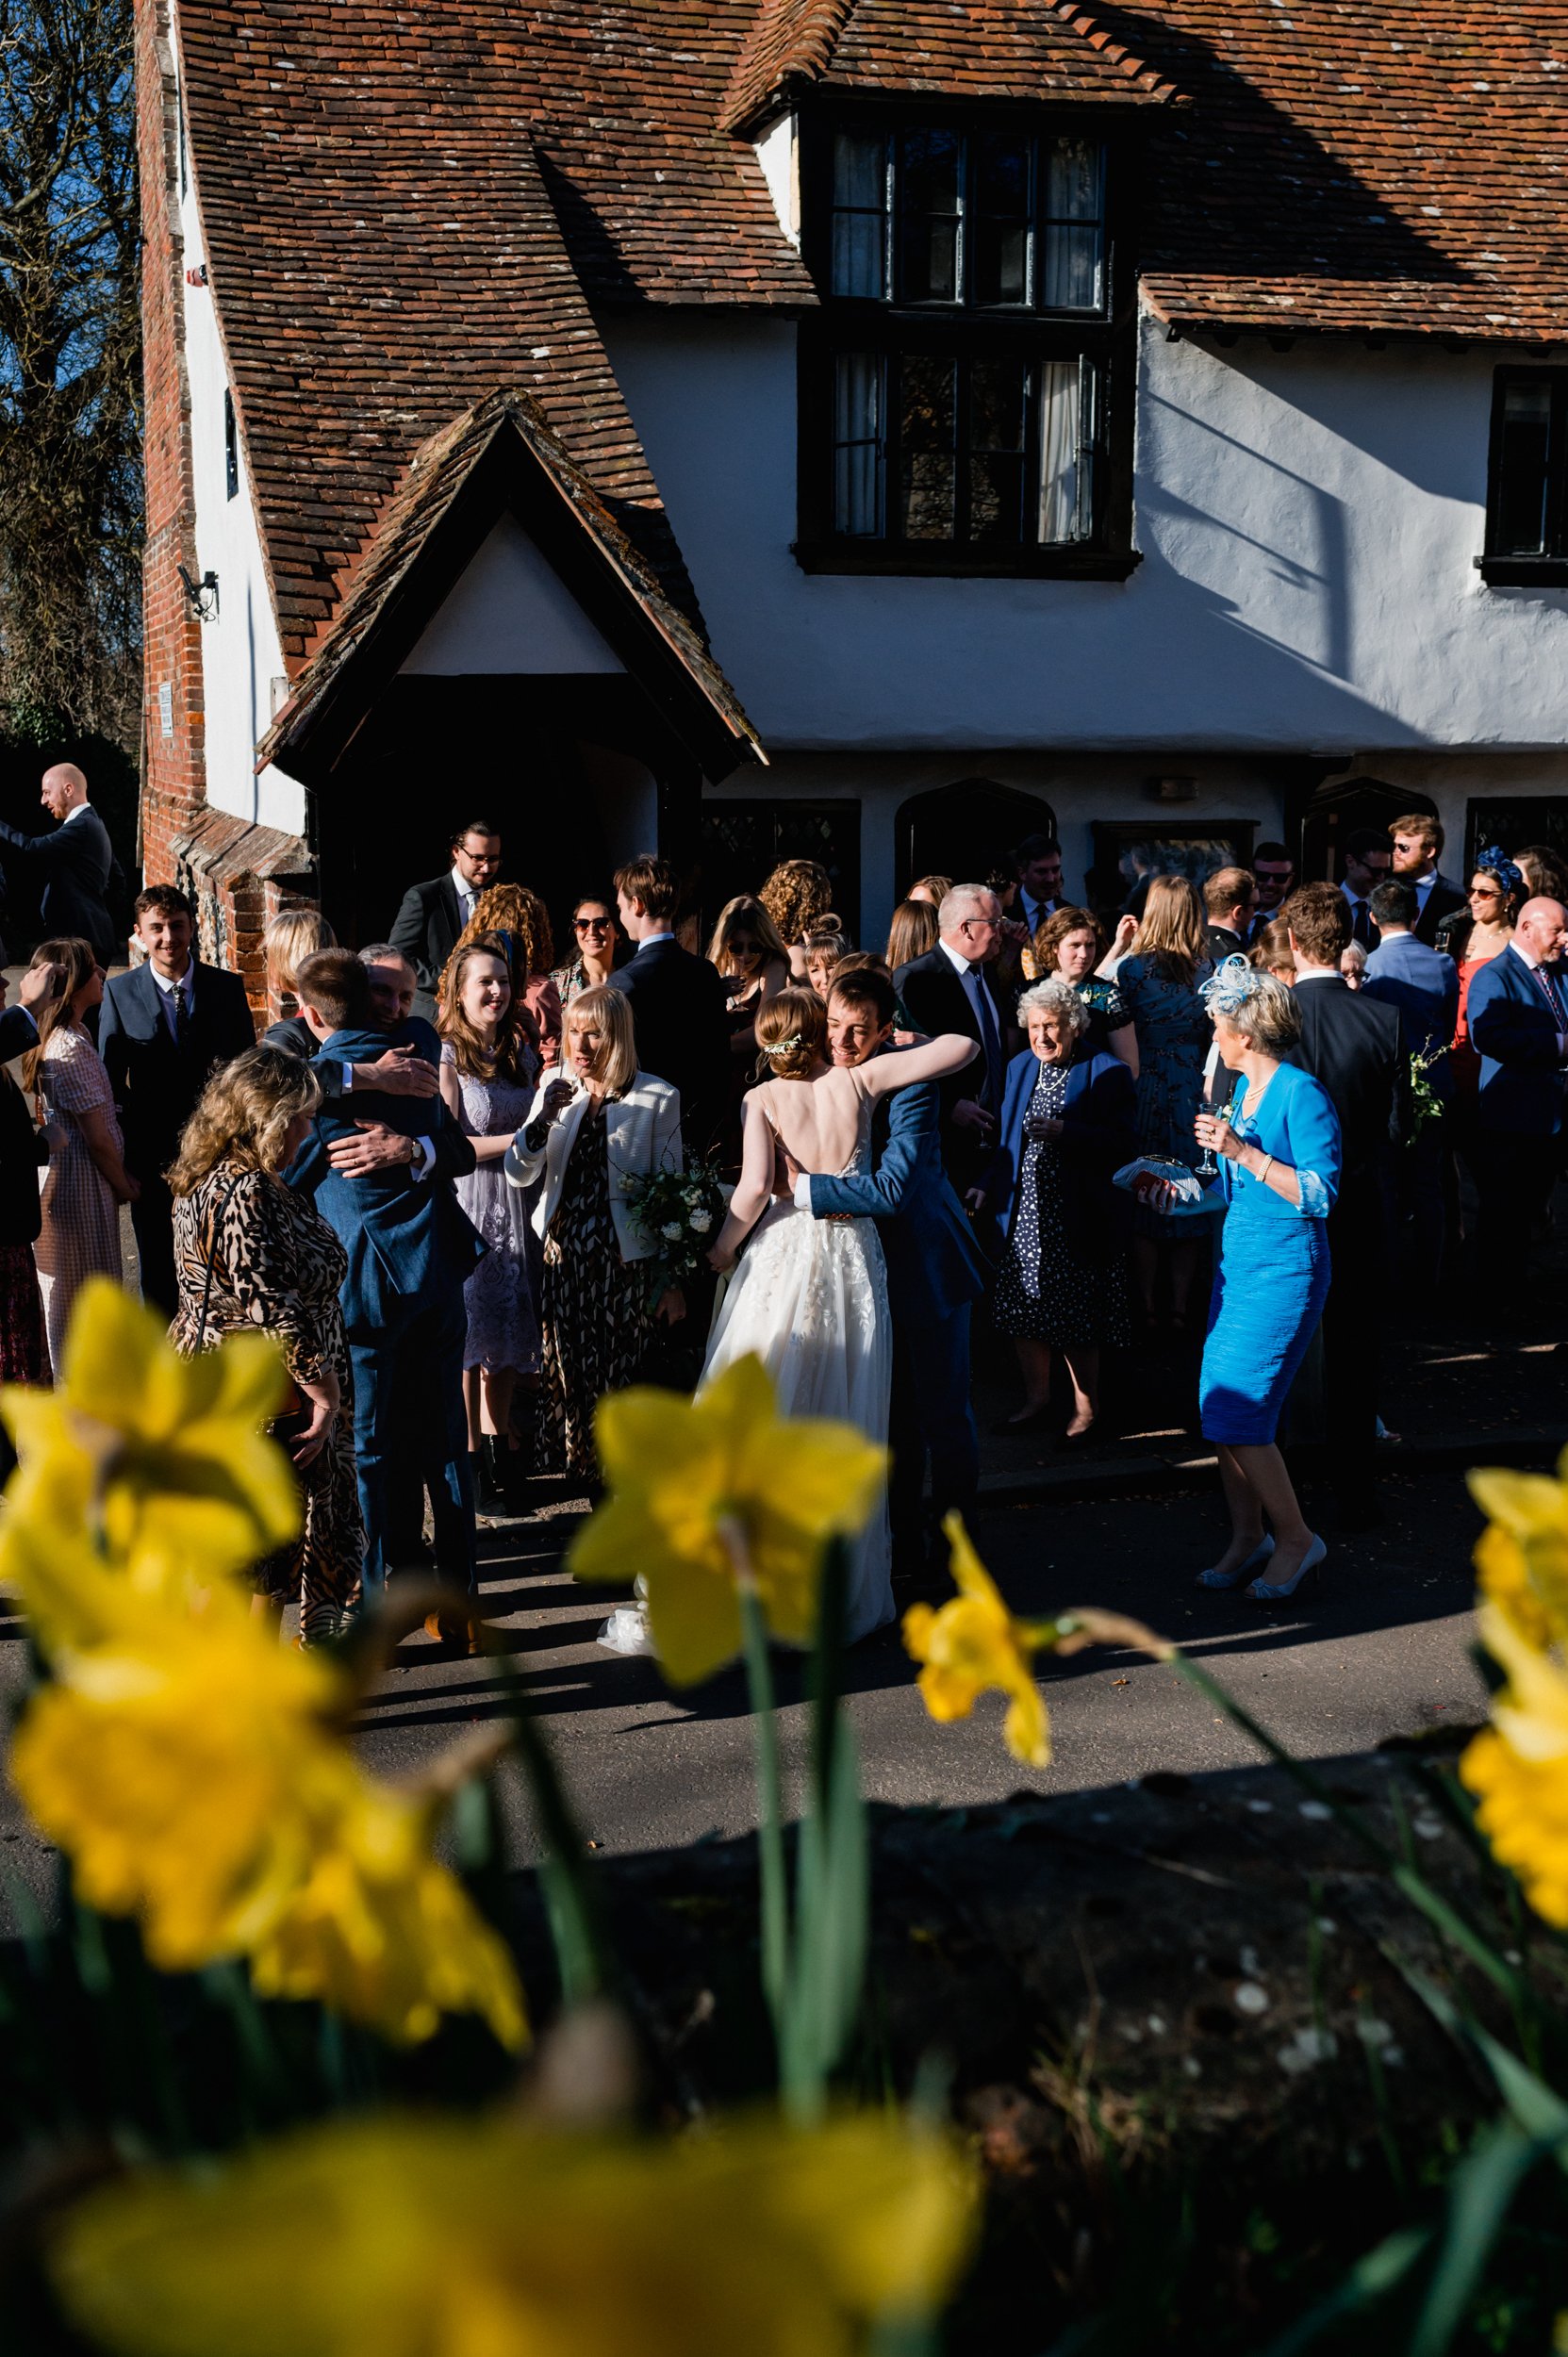  Natural, candid, documentary wedding photography. Hertfordshire wedding at Barley Town House, Royston. 